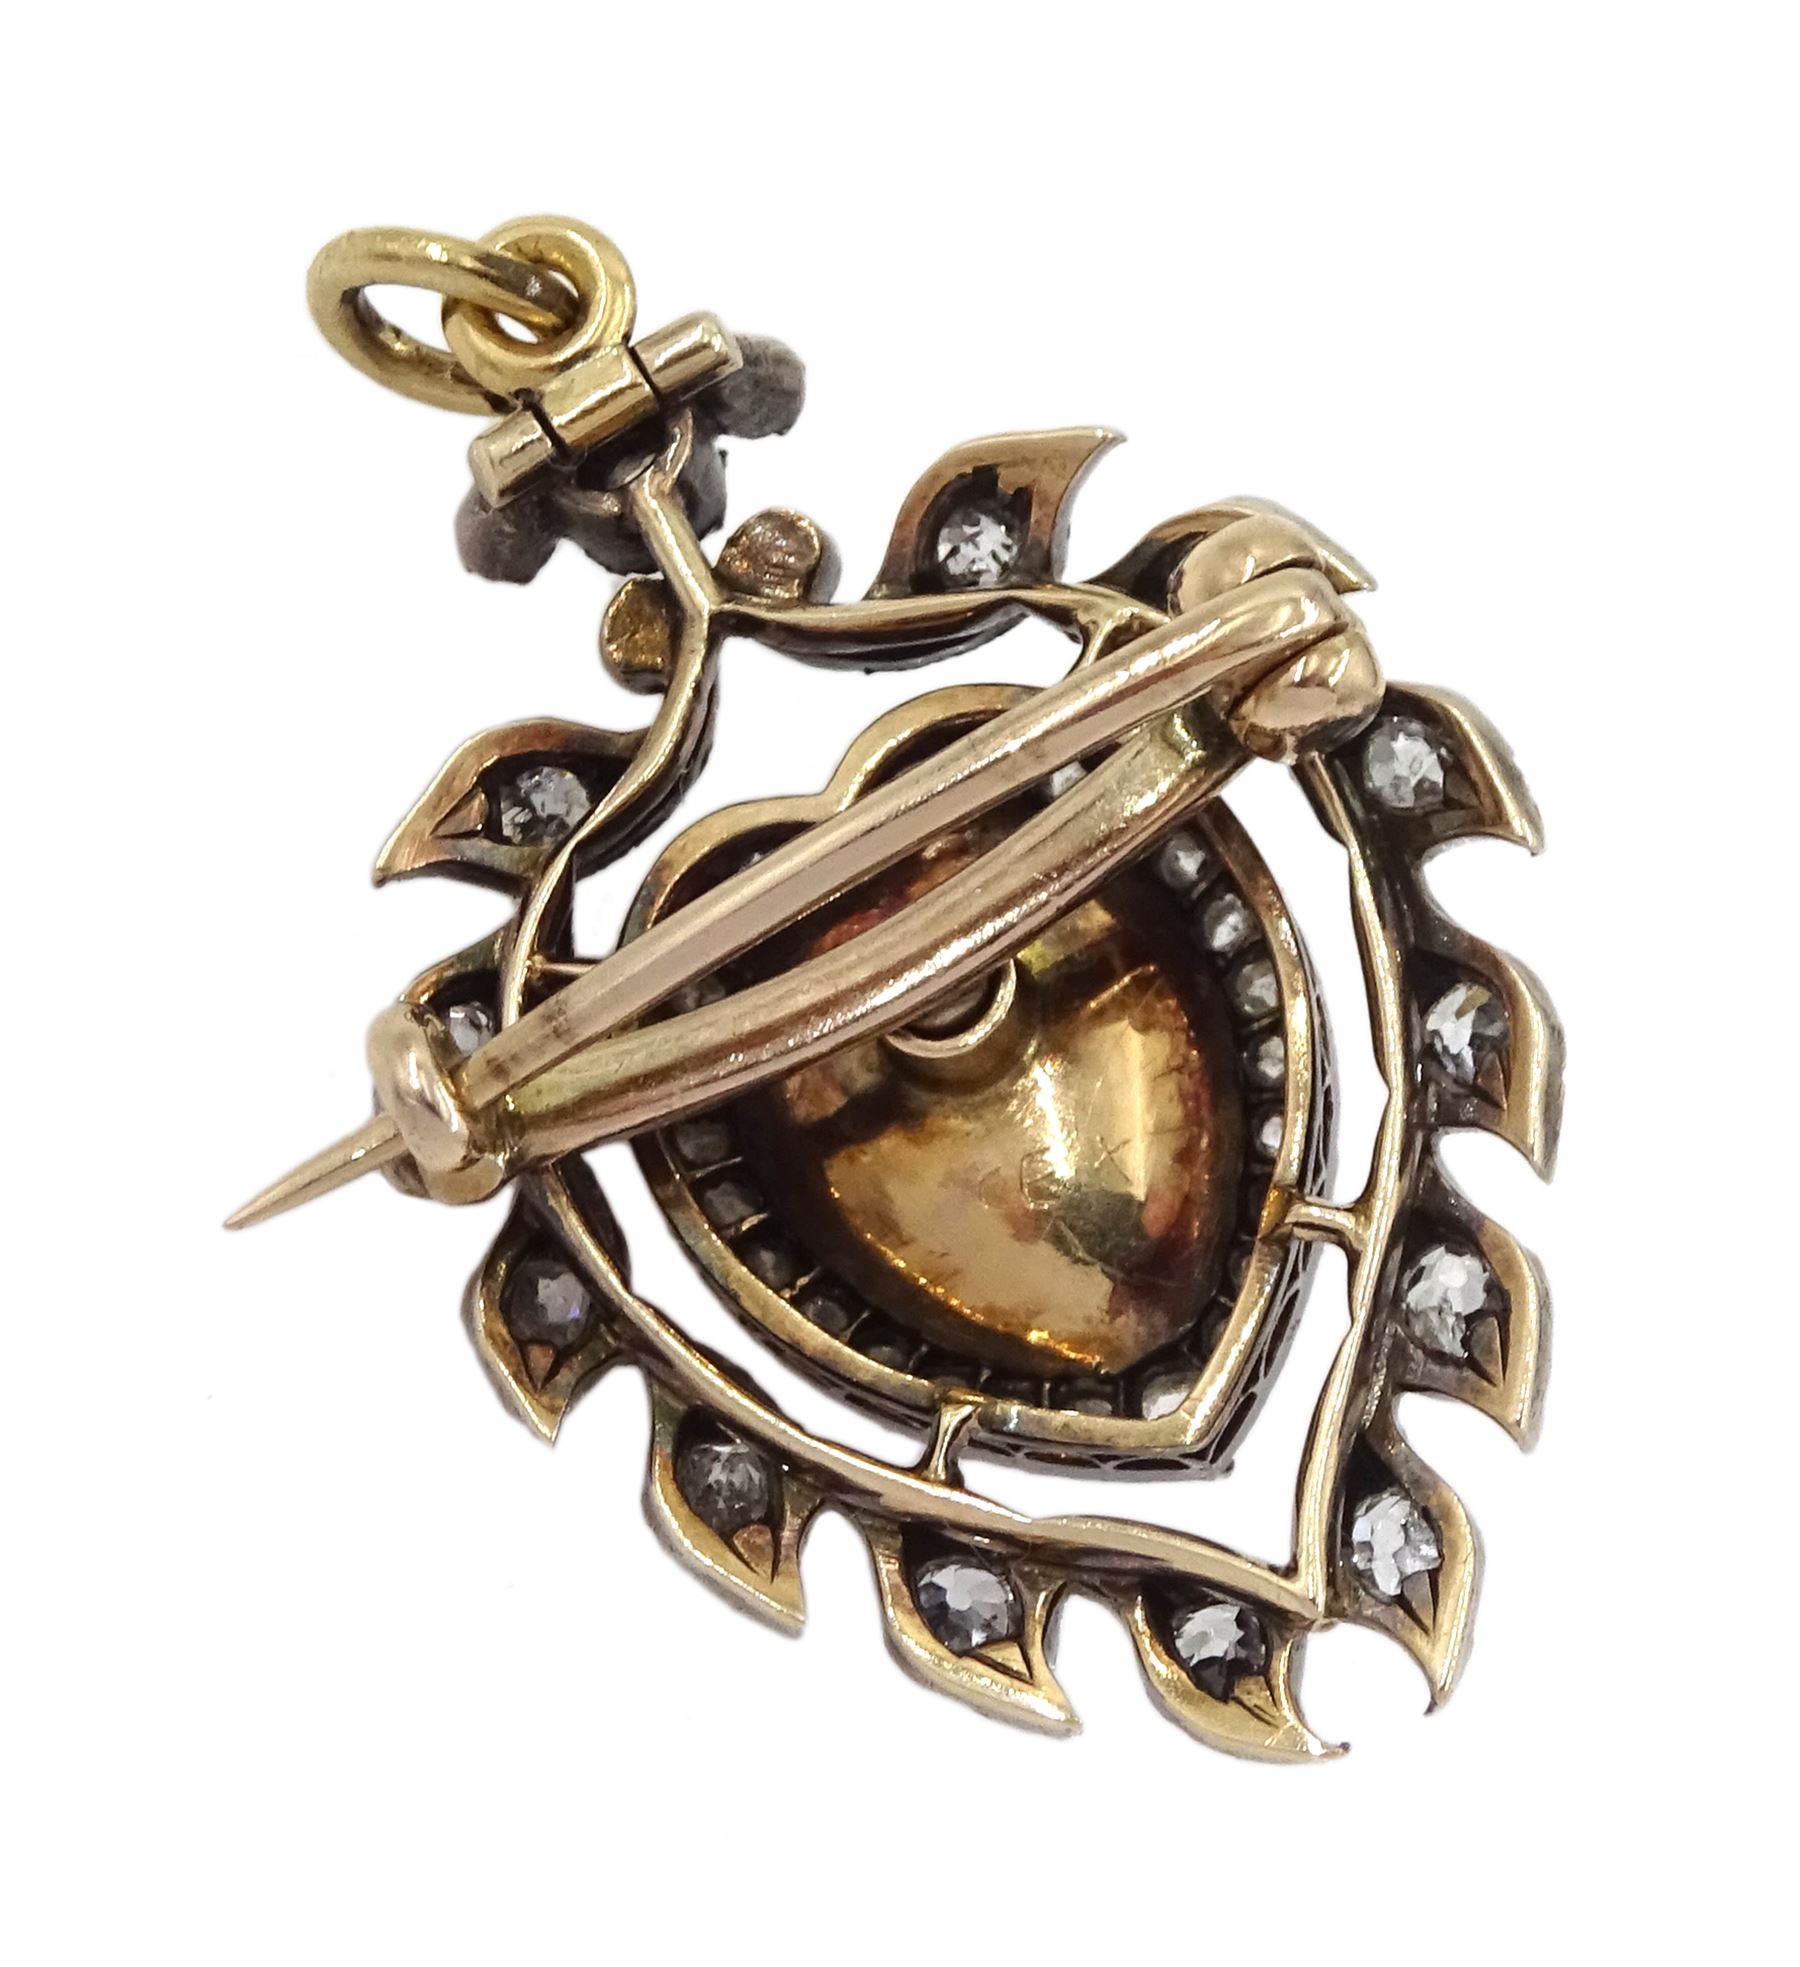 Victorian gold and silver heart shaped pendant/brooch - Image 4 of 4